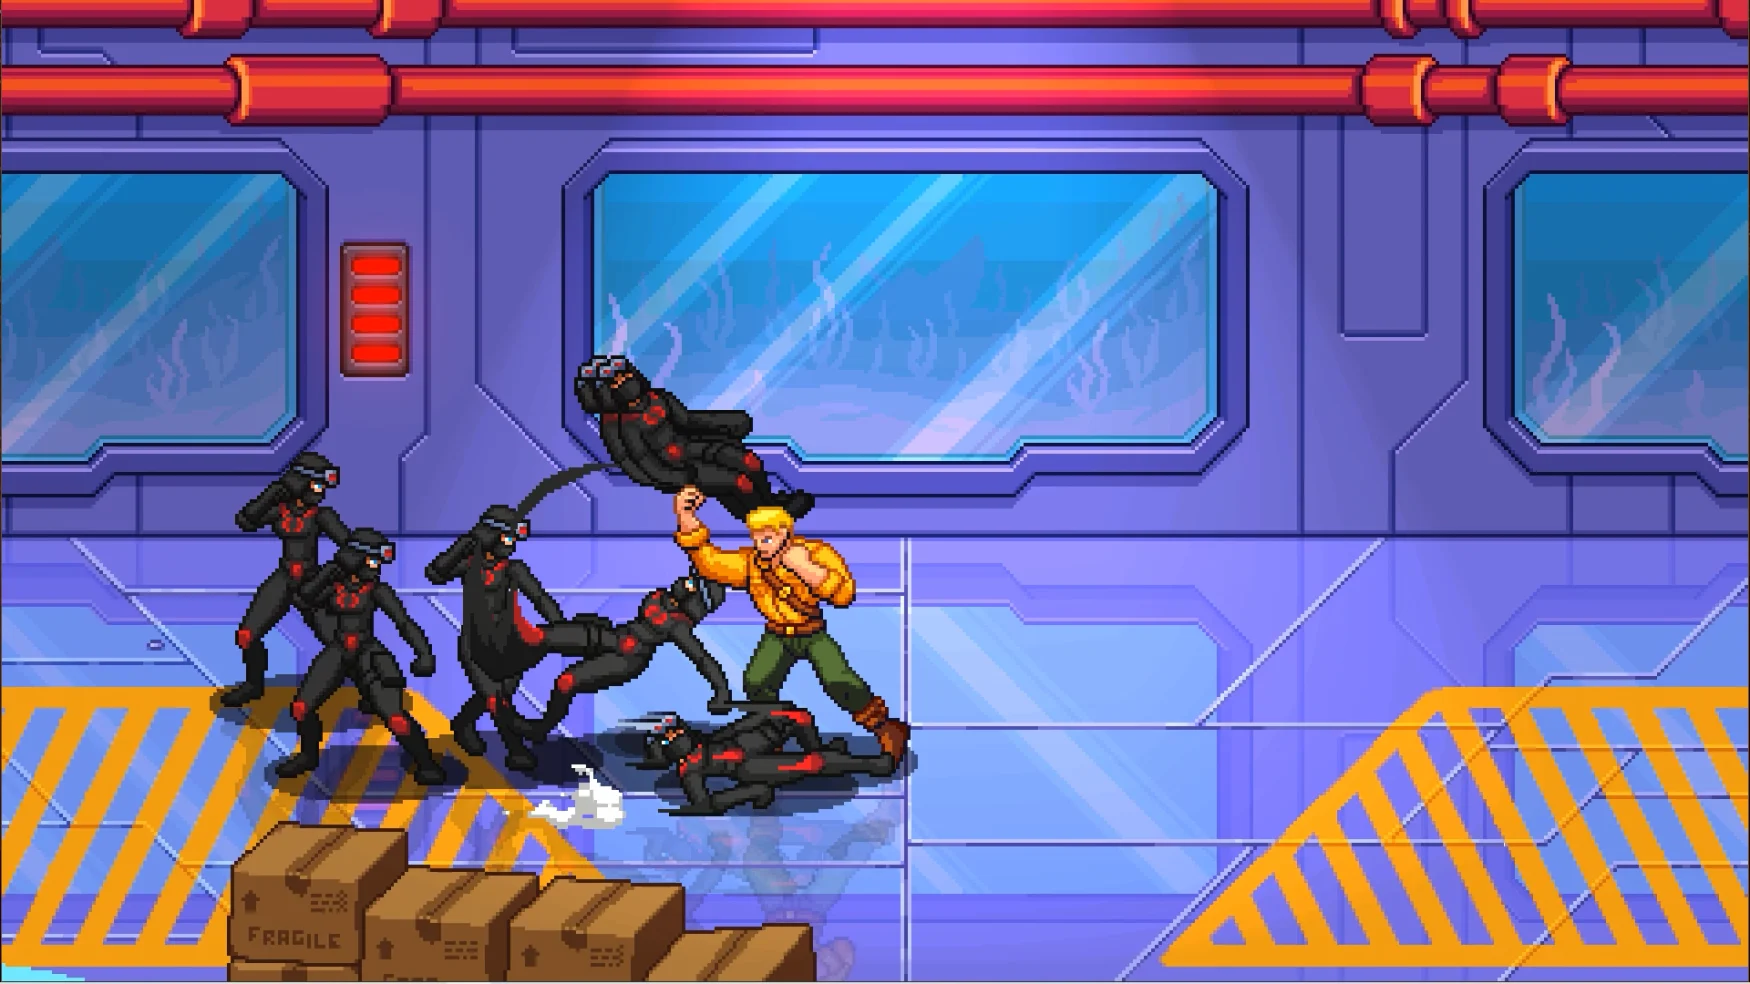 Gameplay still from the upcoming beat ‘em up ‘G.I. Joe: Wrath of Cobra.’ Duke (gold shirt, green jeans) swings an uppercut as various Cobra soldiers go flying. Blue background with futuristic windows and red pipes in a retro 80s / 90s art style.